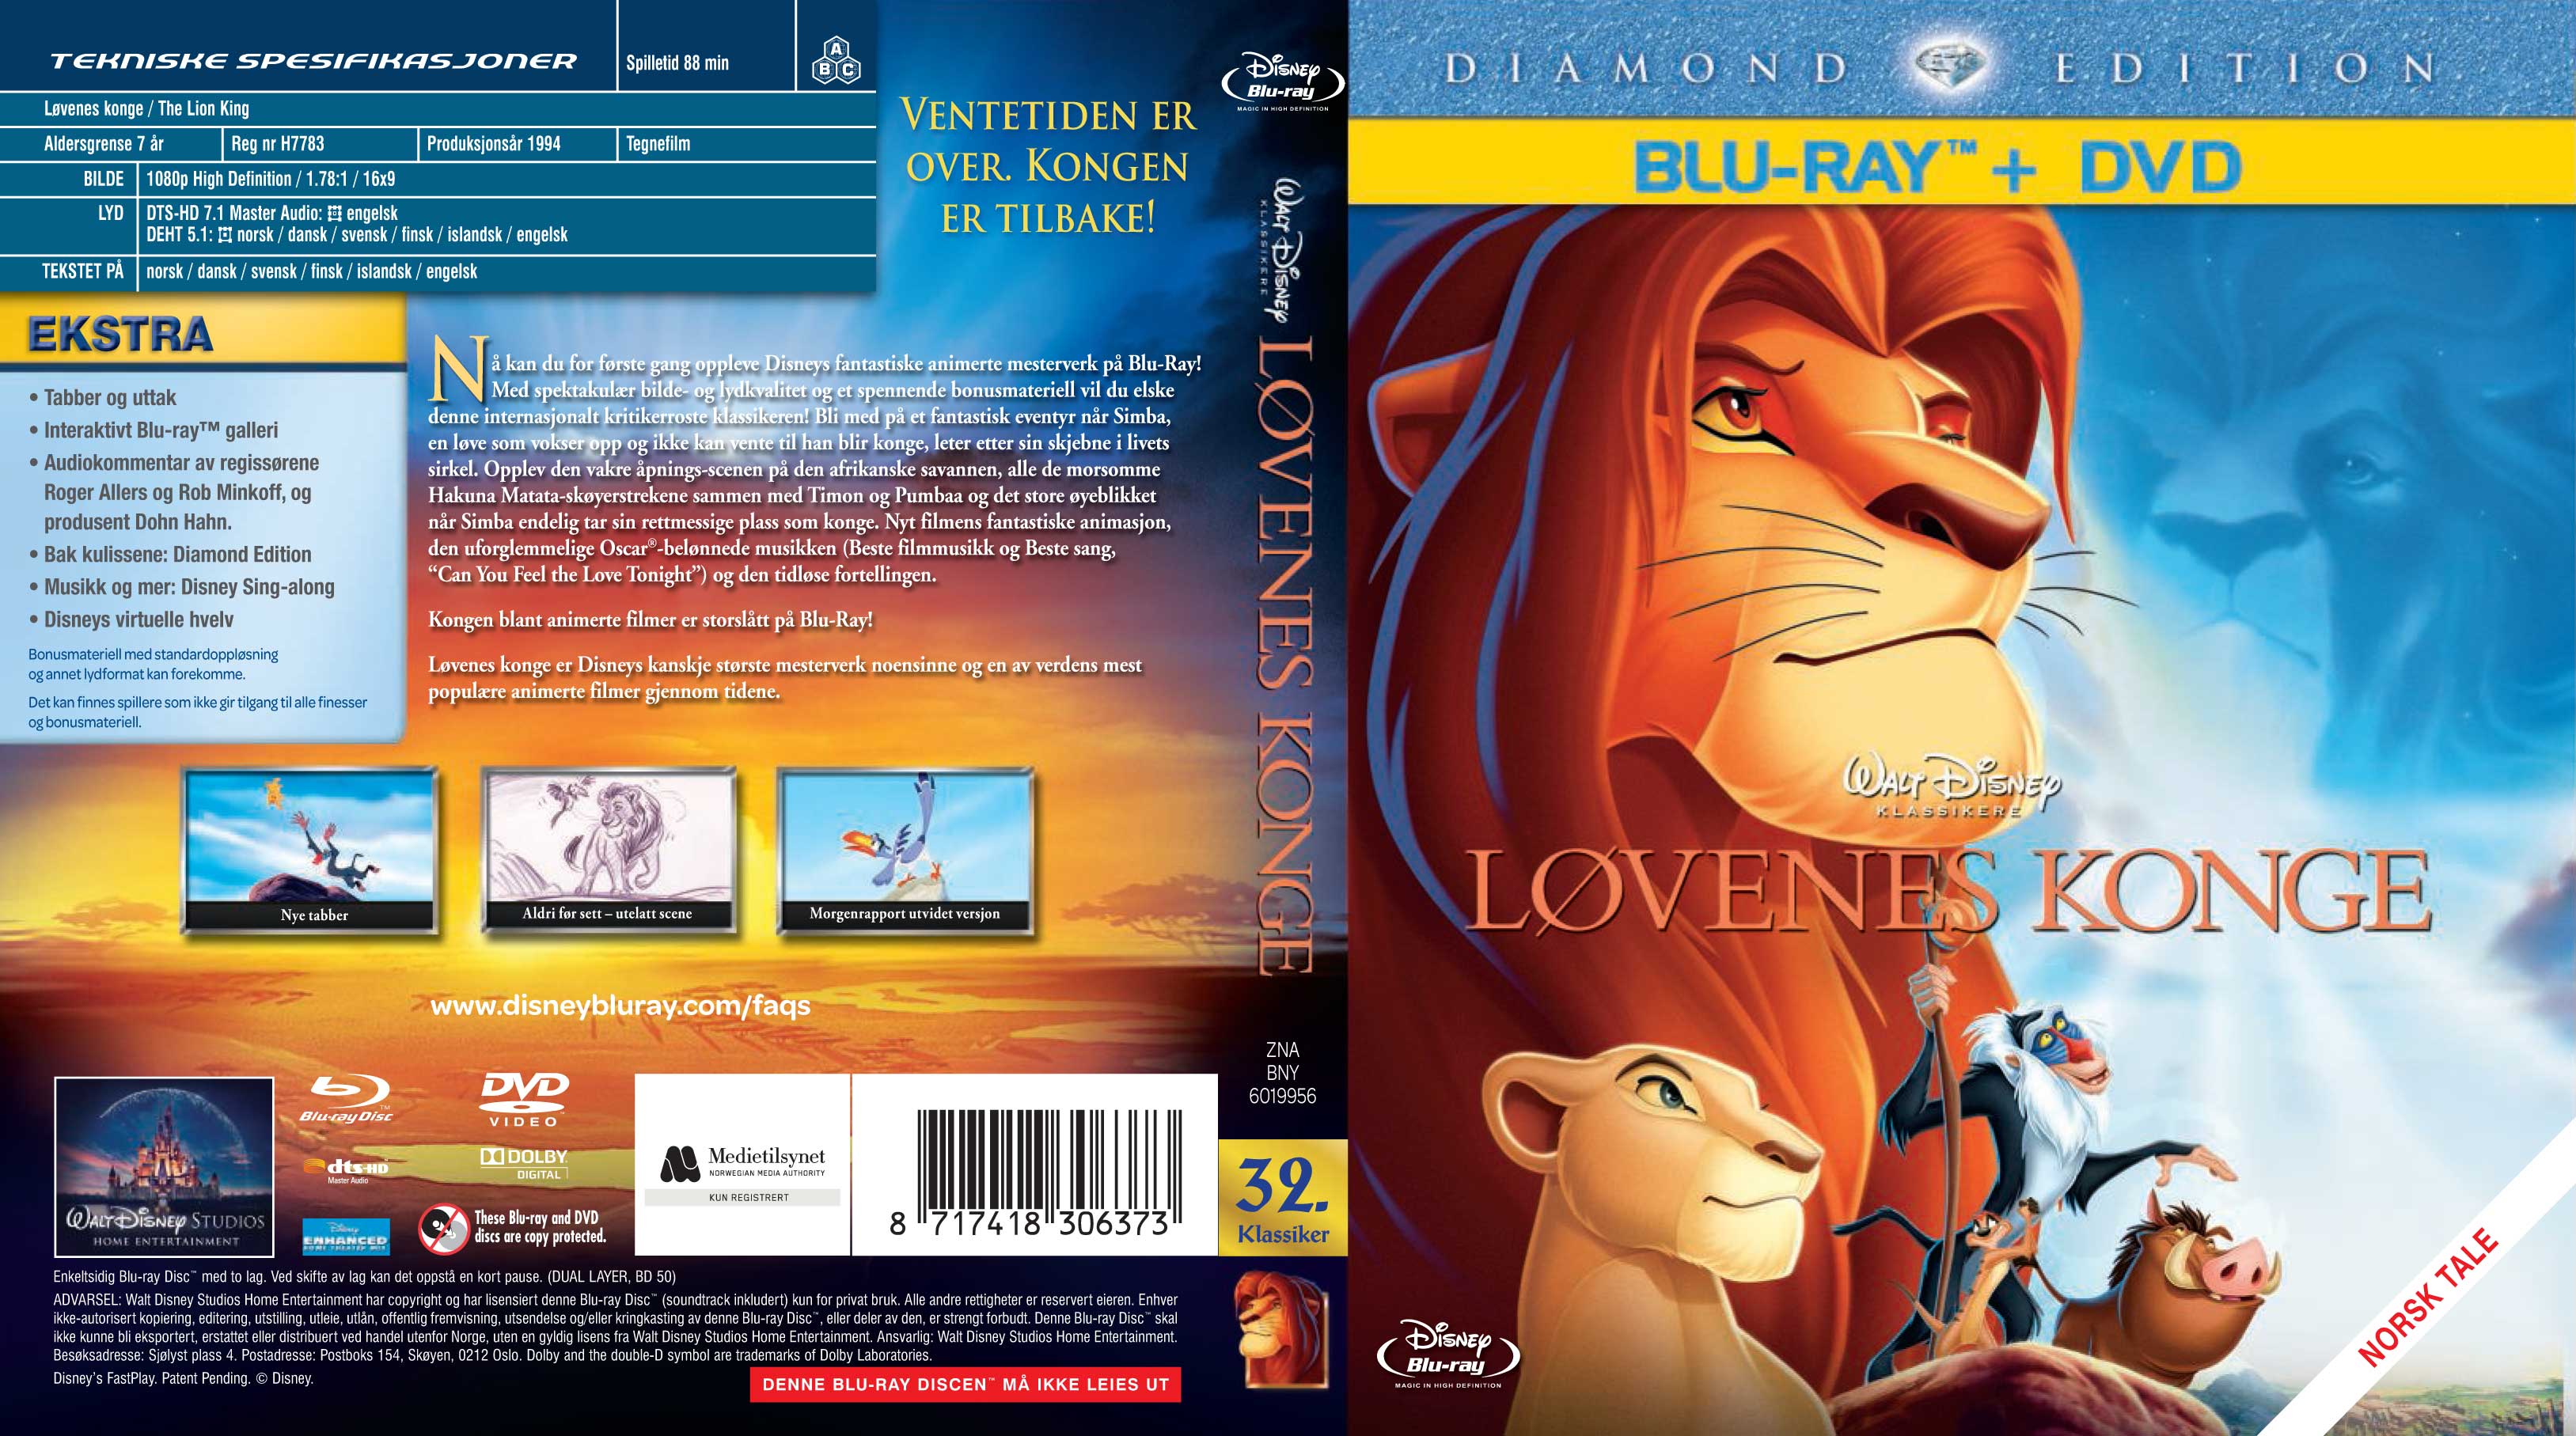 lion king 3 movie cover